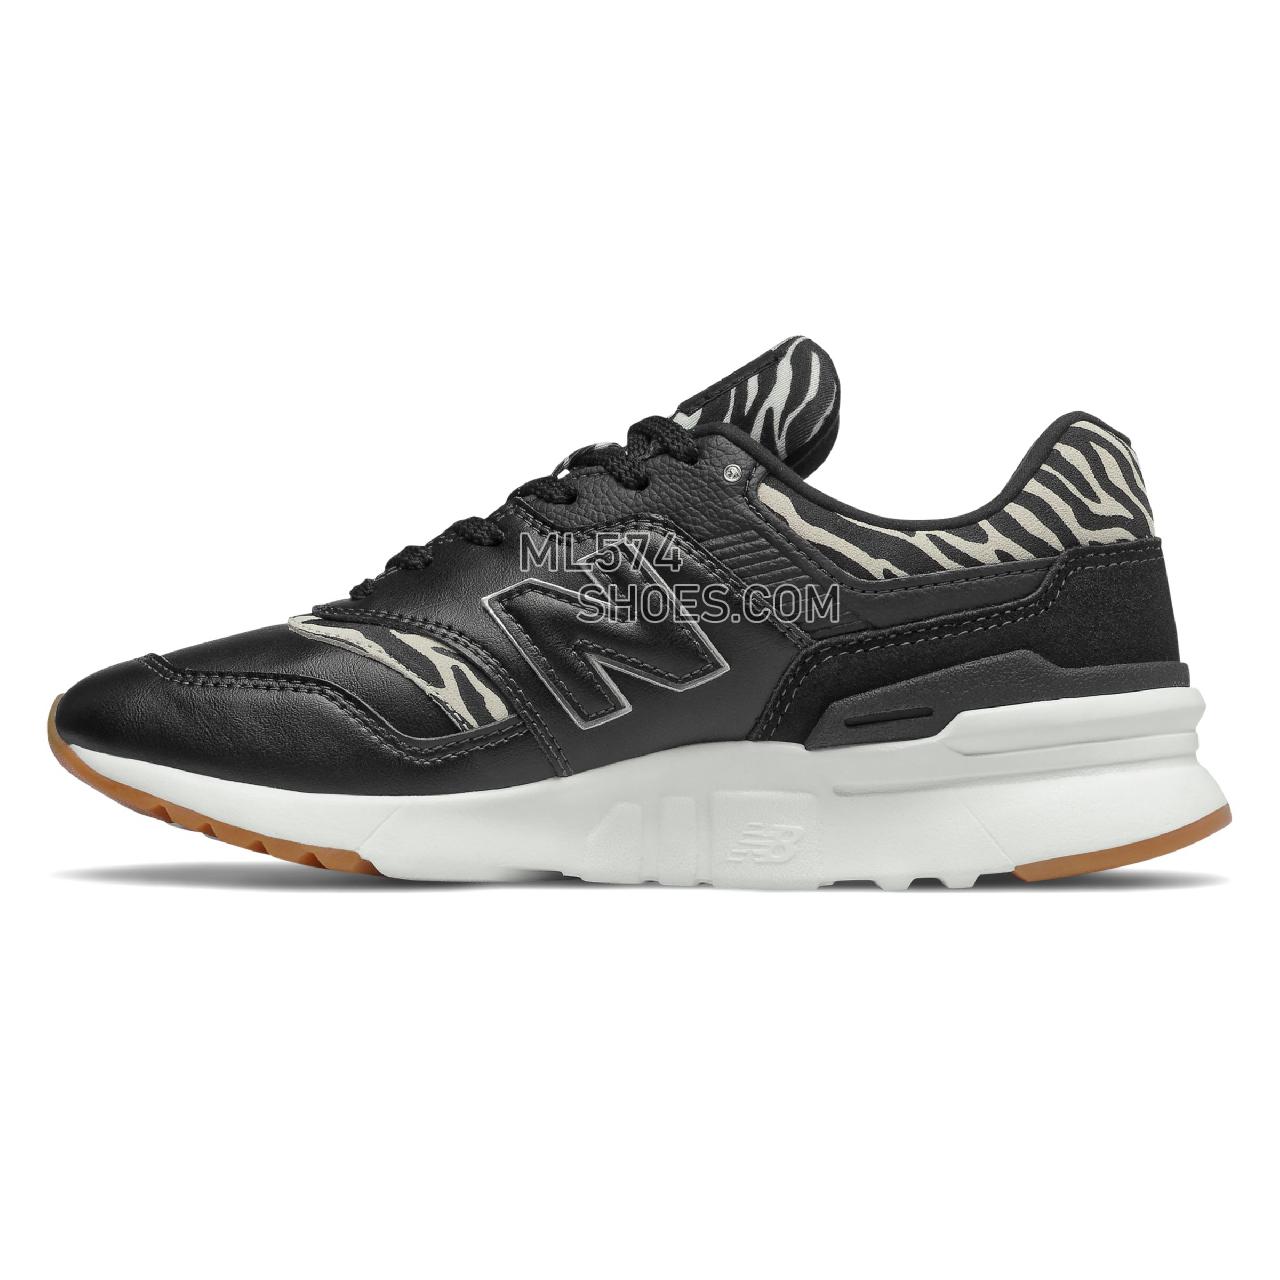 New Balance 997H - Women's Classic Sneakers - Black with Gum - CW997HCI